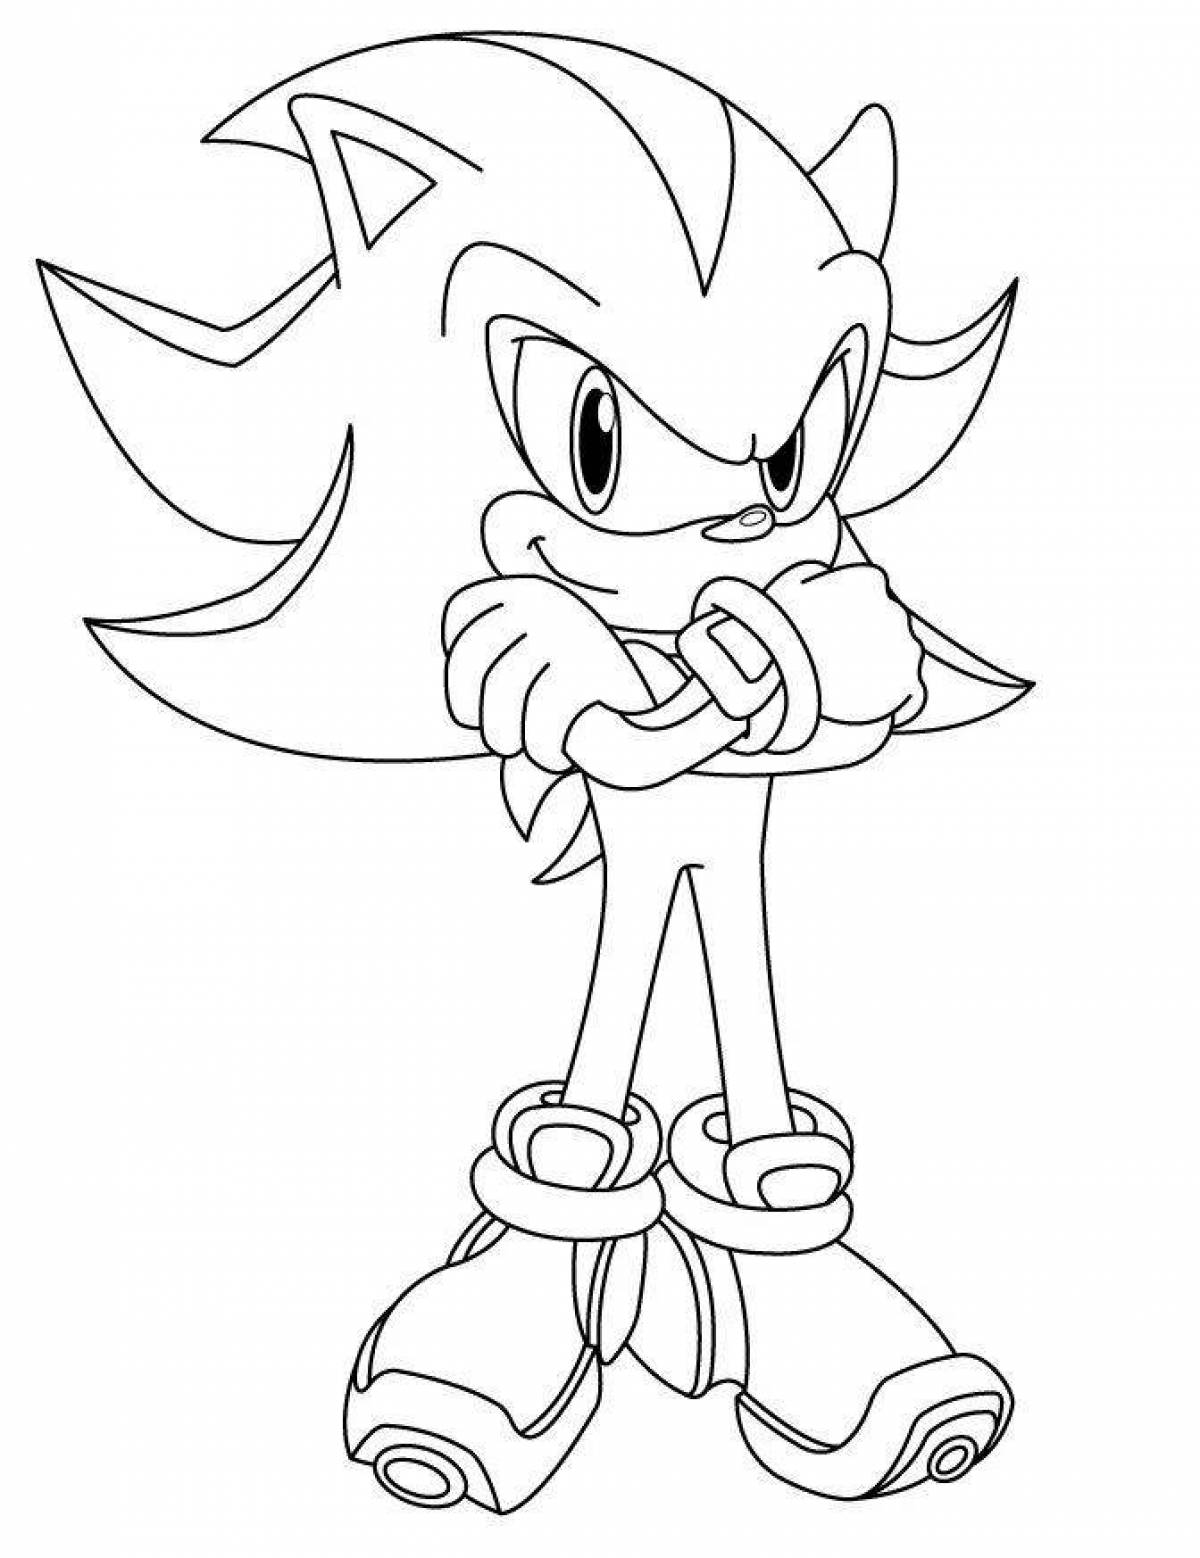 Awesome sonic shadow coloring page